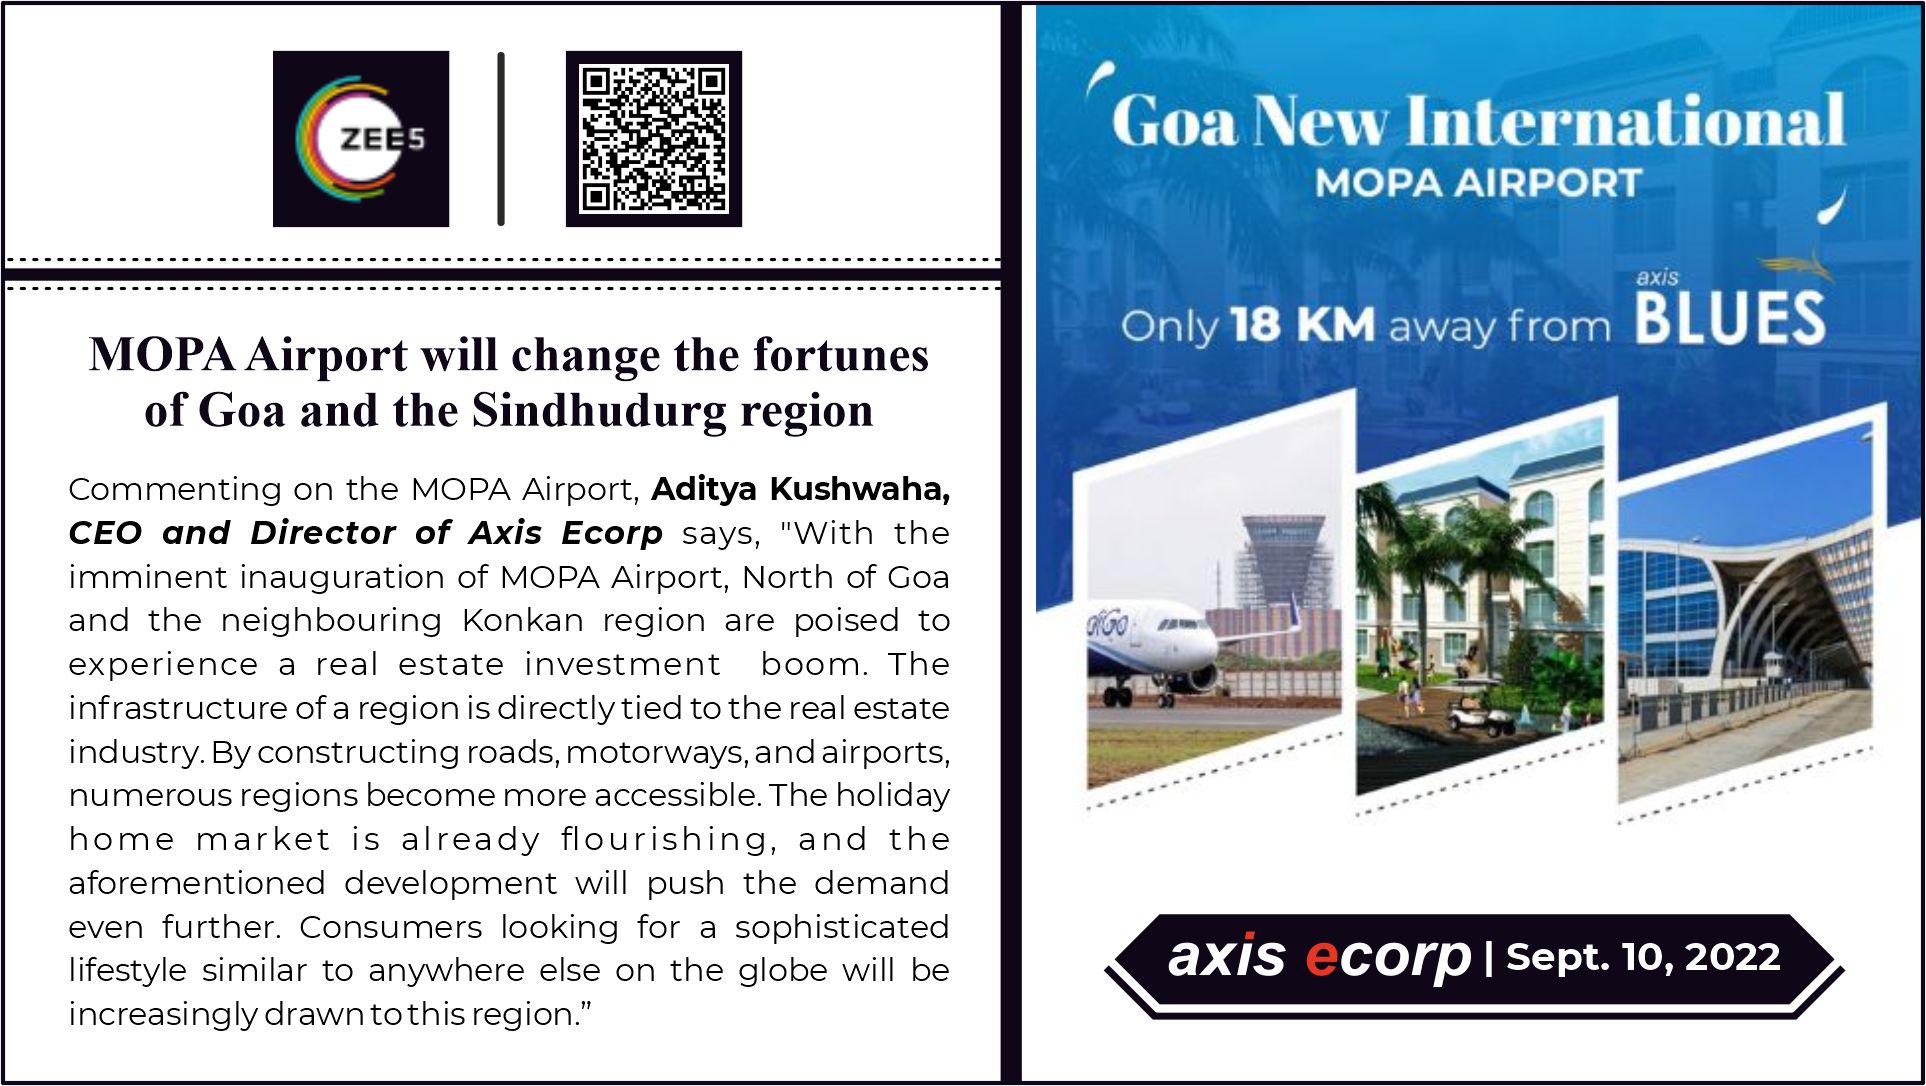 MOPA Airport will change the fortunes of Goa and the Sindhudurg region 